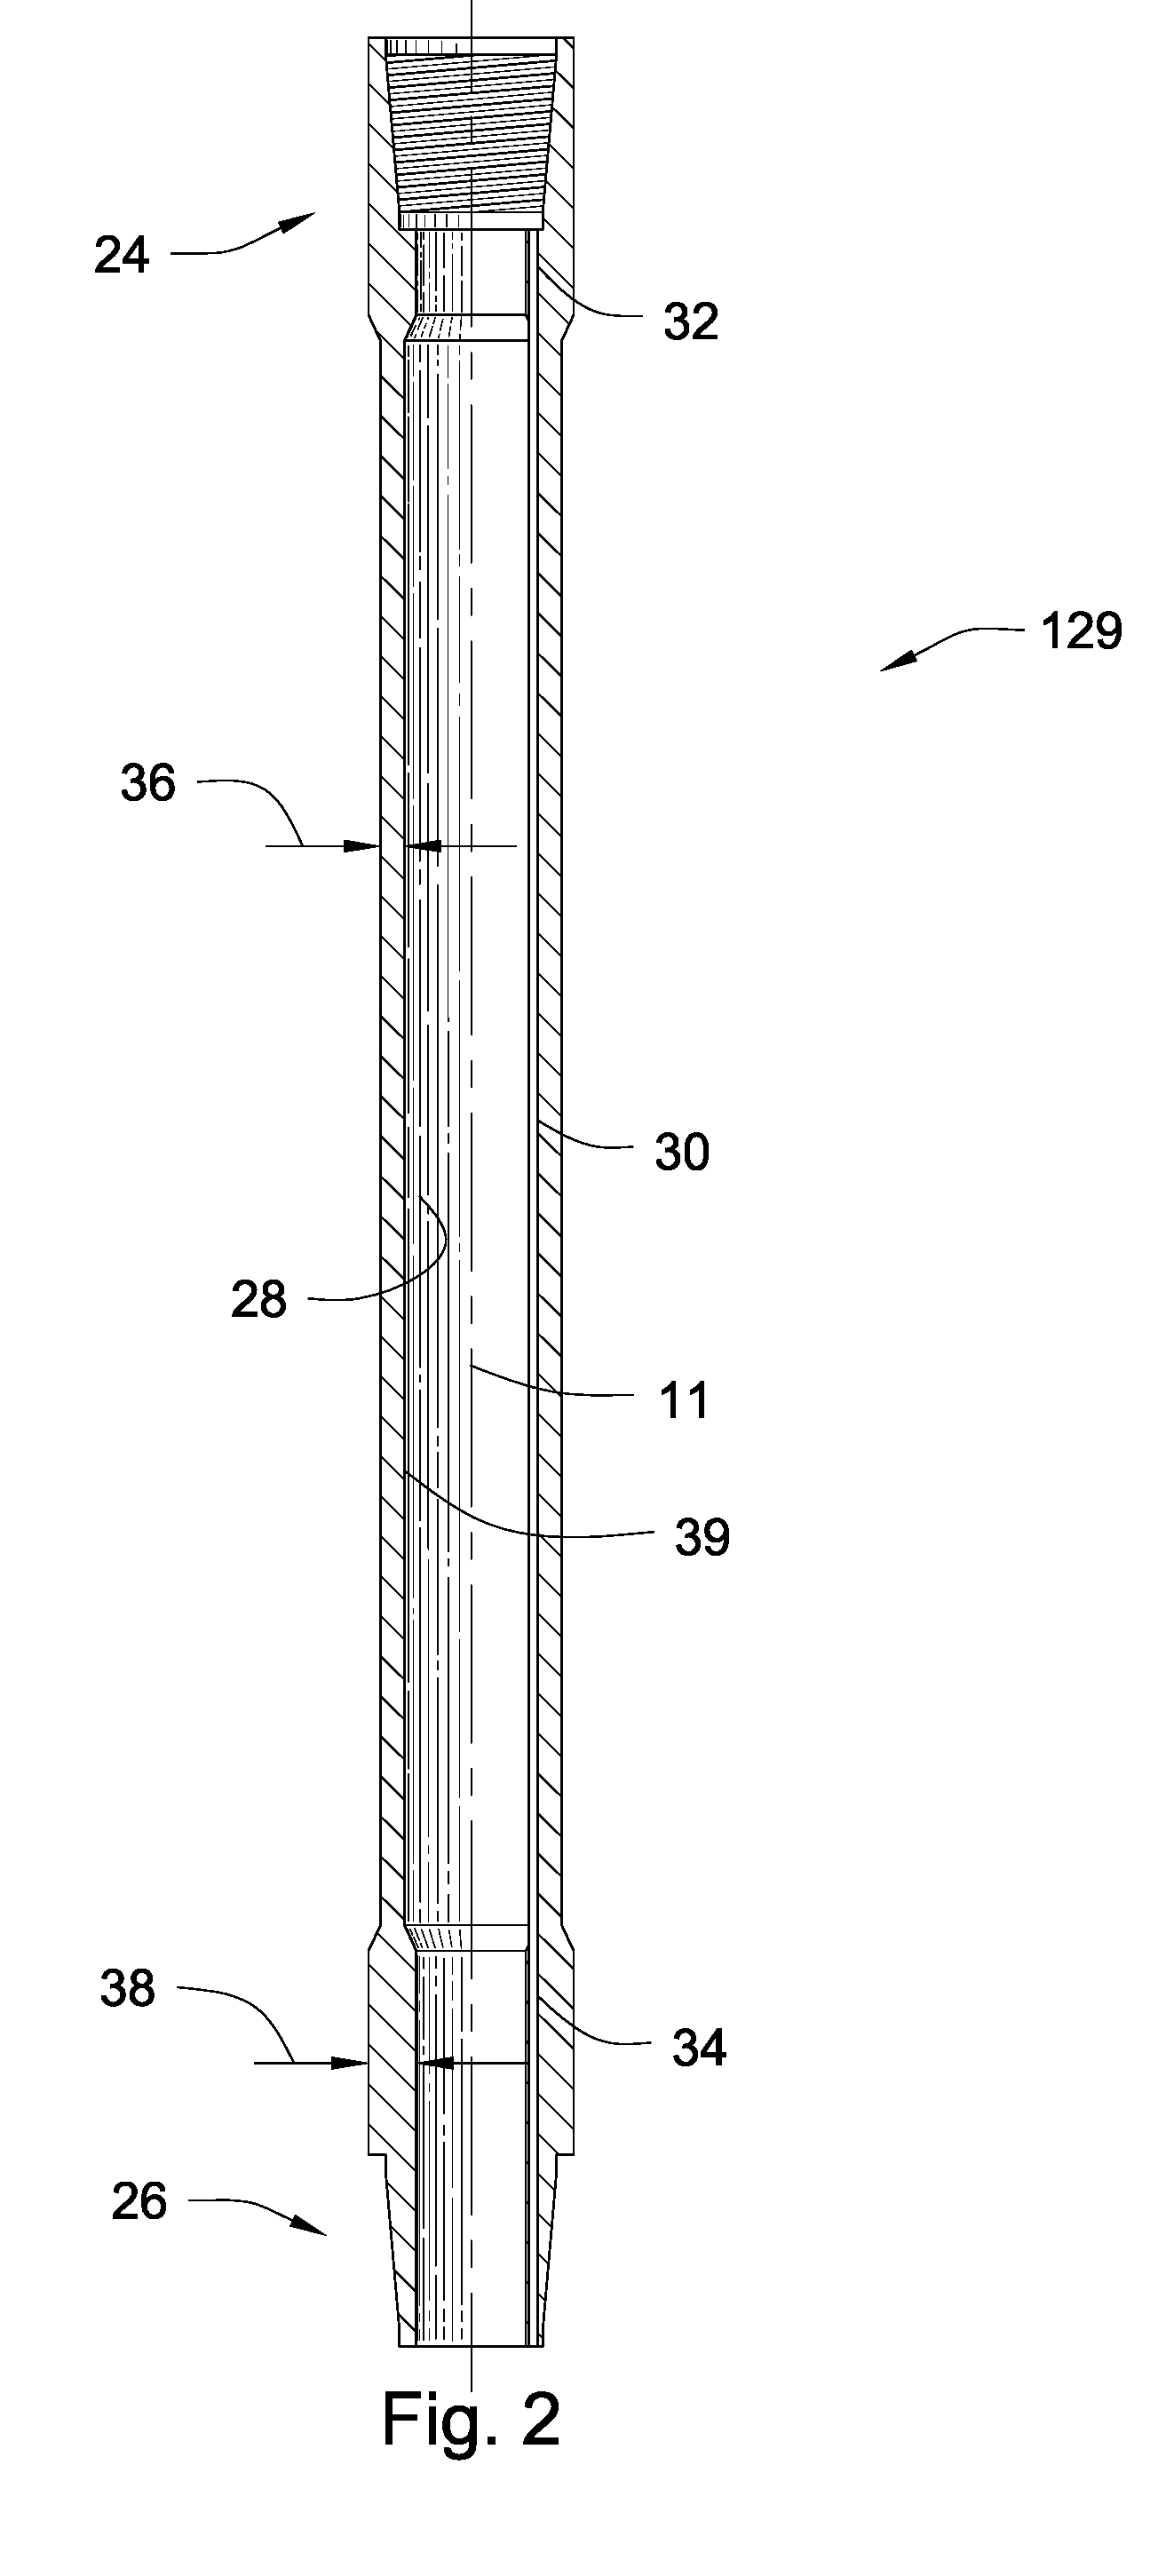 Apparatus and method for routing a transmission line through a downhole tool